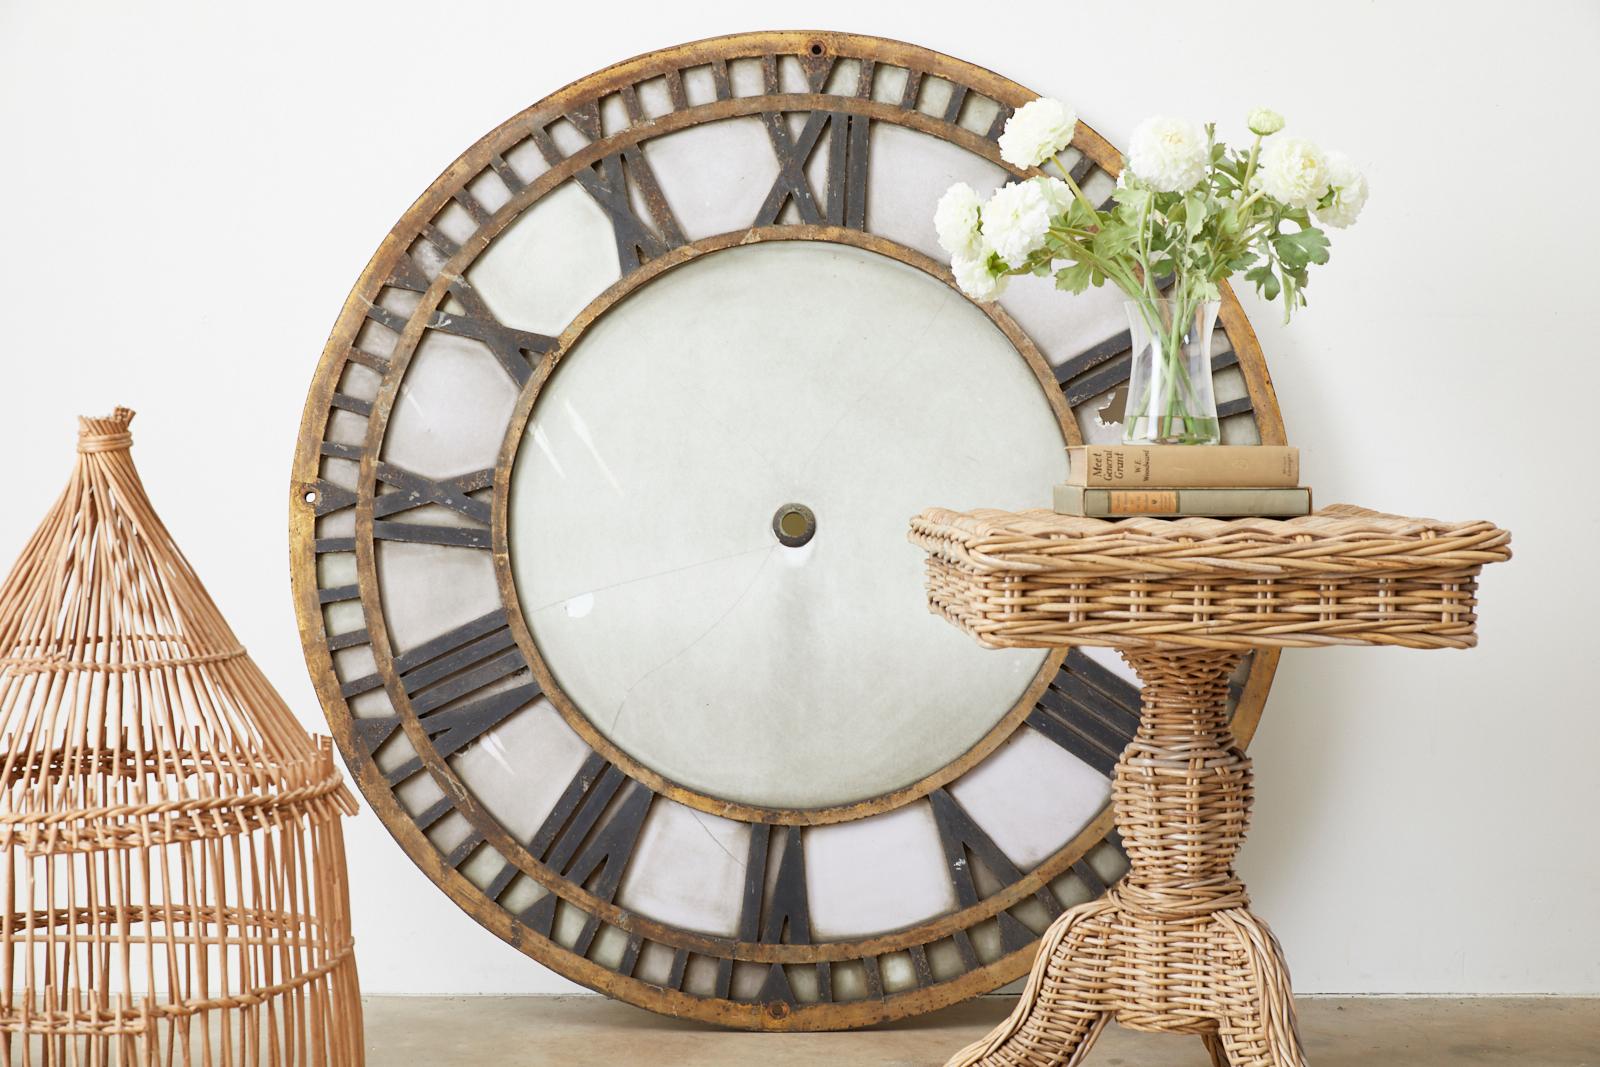 Monumental 19th century French clock face constructed from a 1.25 inch thick iron frame. The large face features Roman numerals and a parcel gilt finish with a beautifully distressed patina. The frame is inlaid with old milk glass. Originally from